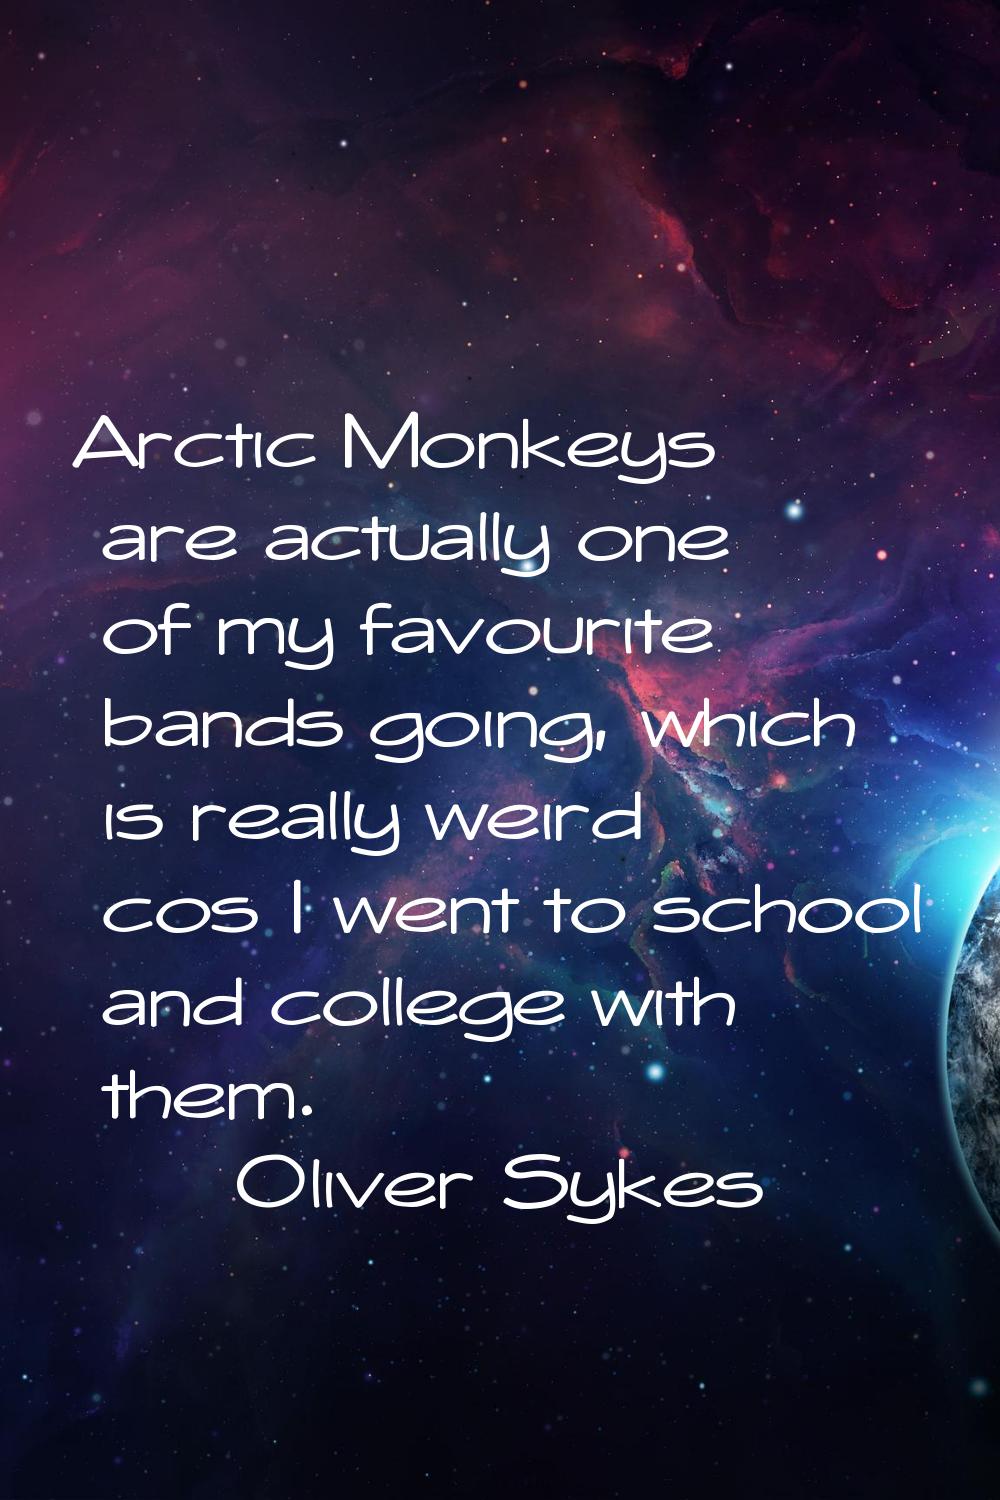 Arctic Monkeys are actually one of my favourite bands going, which is really weird cos I went to sc